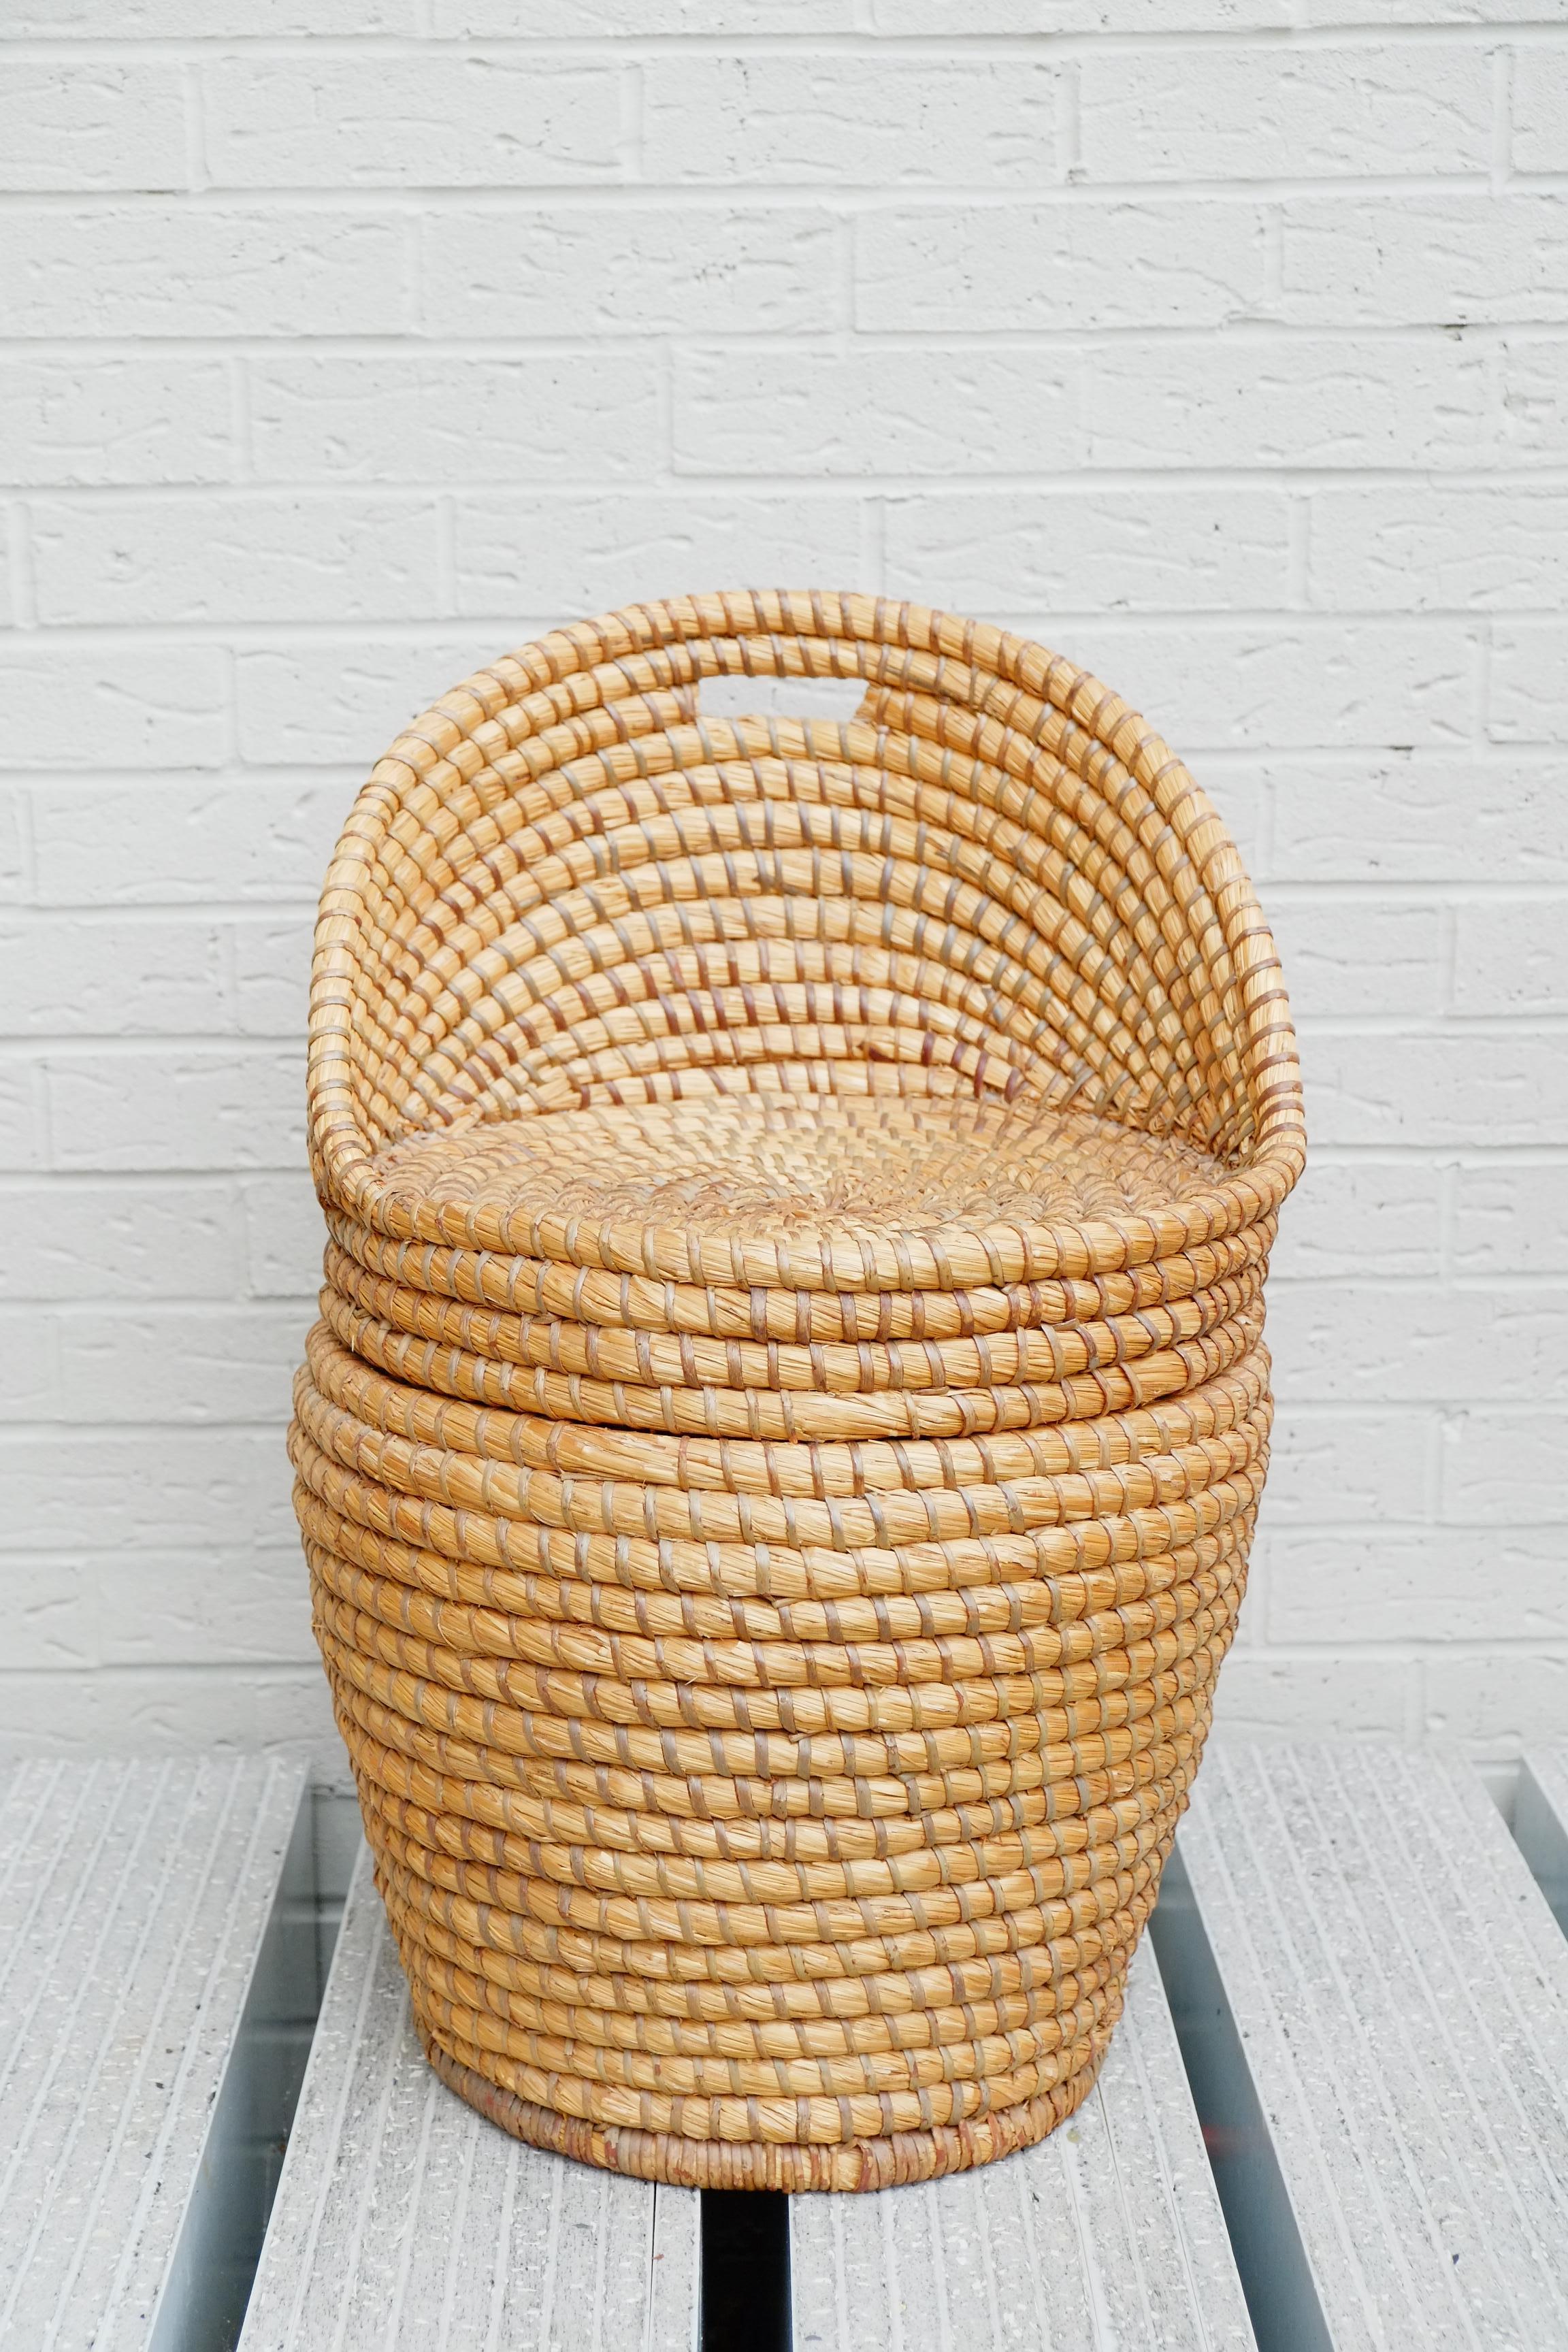 Hand-Woven Midcentury Bohemian Reeded Hand Woven Straw Basket Chair / Laundry Basket Seat For Sale